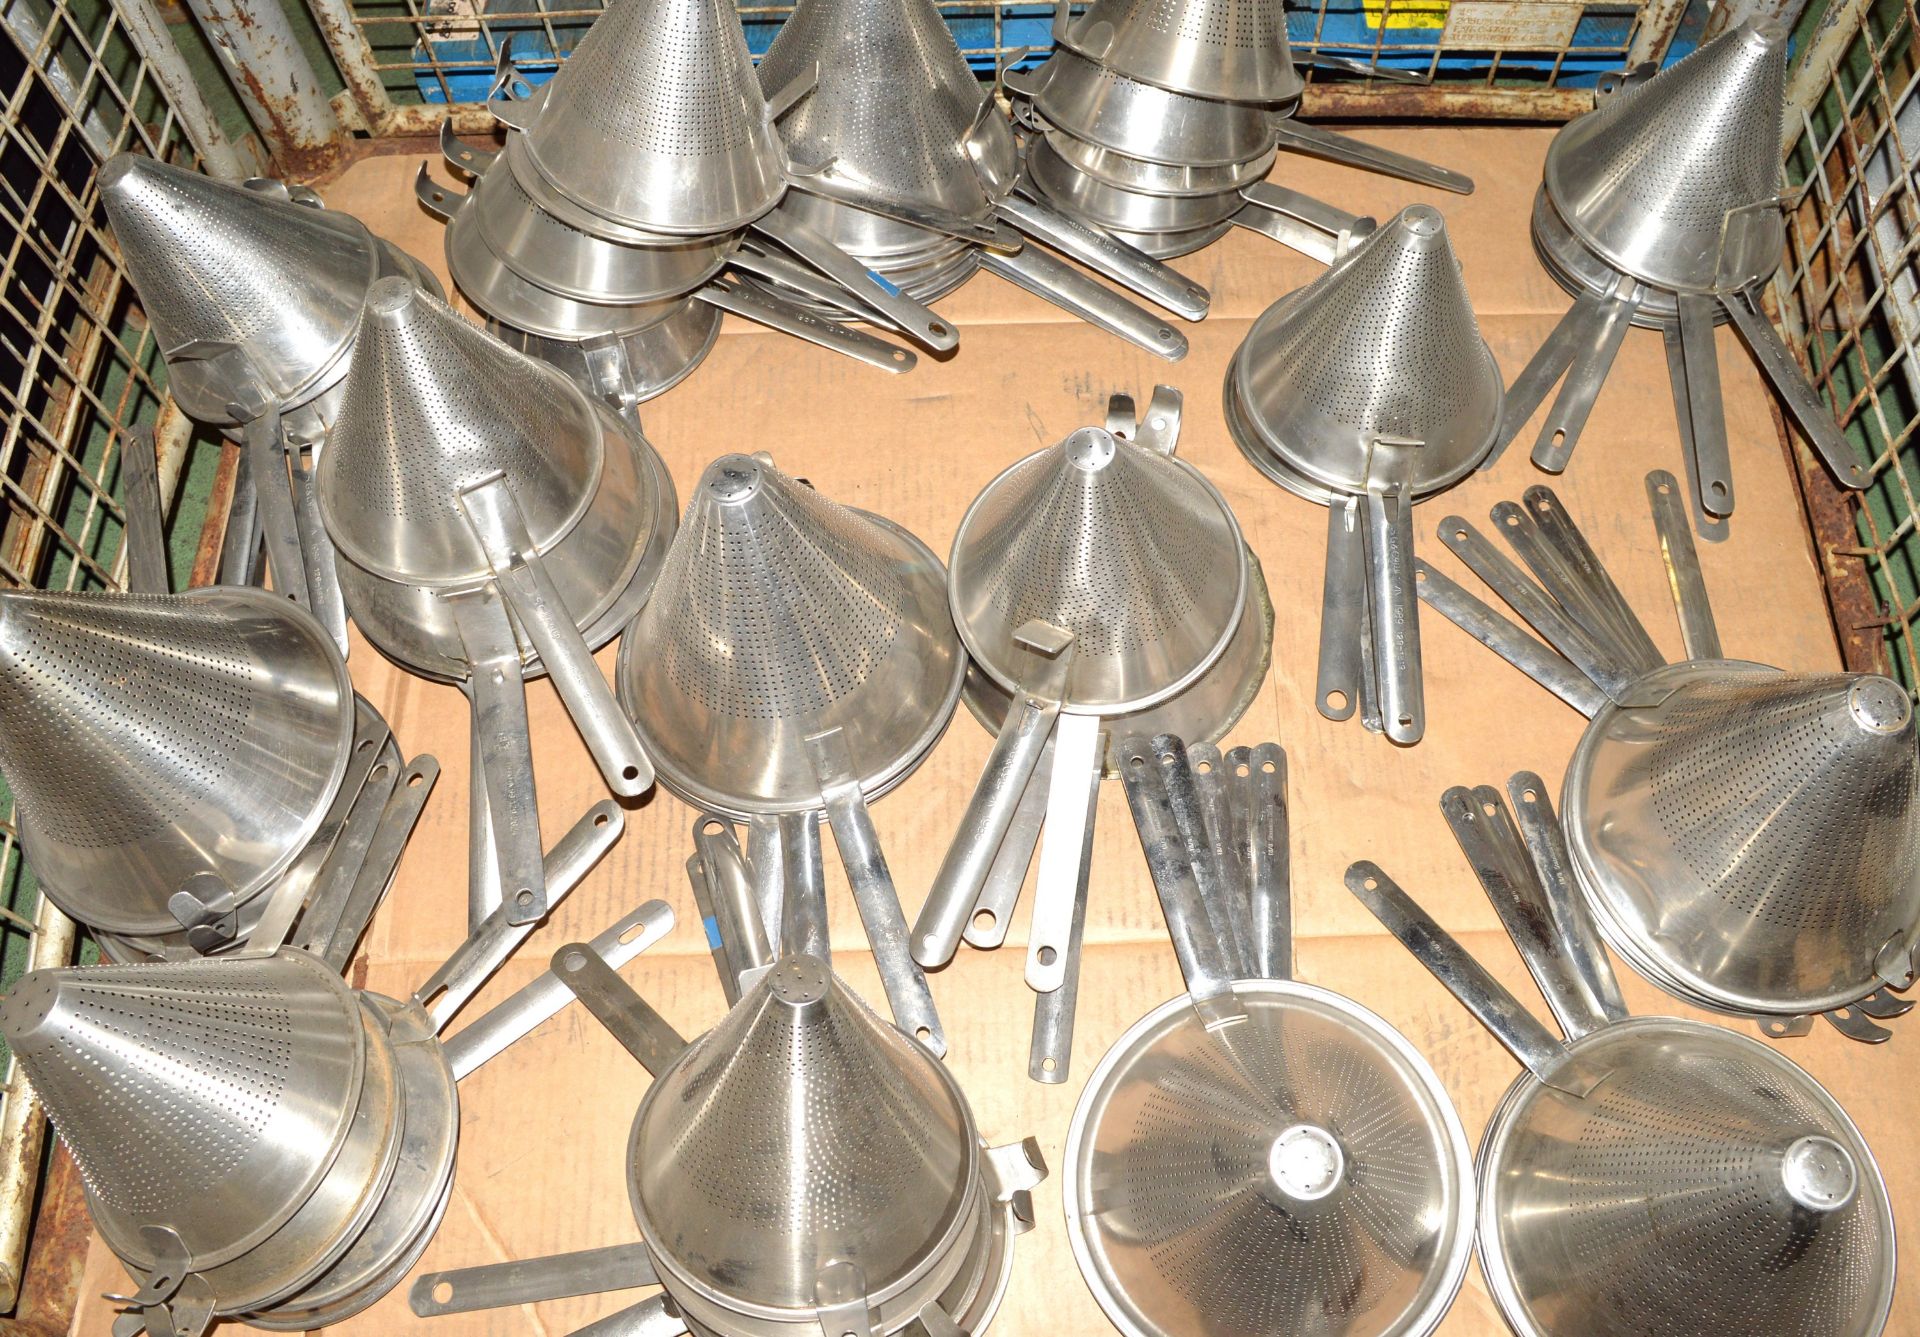 73x Stainless Steel Sieves. - Image 2 of 2